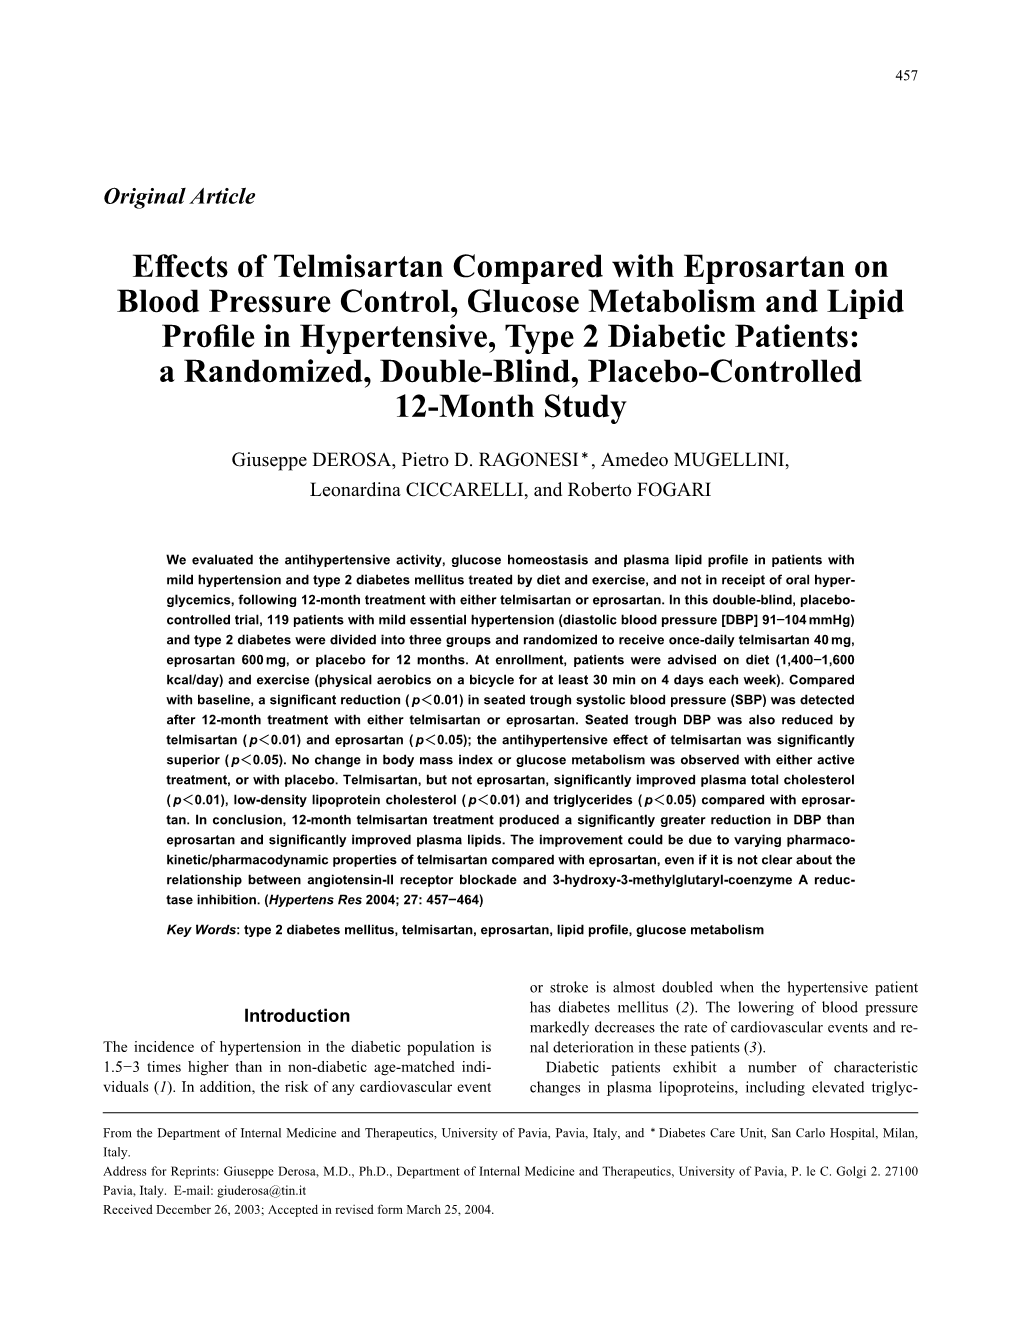 Effects of Telmisartan Compared with Eprosartan on Blood